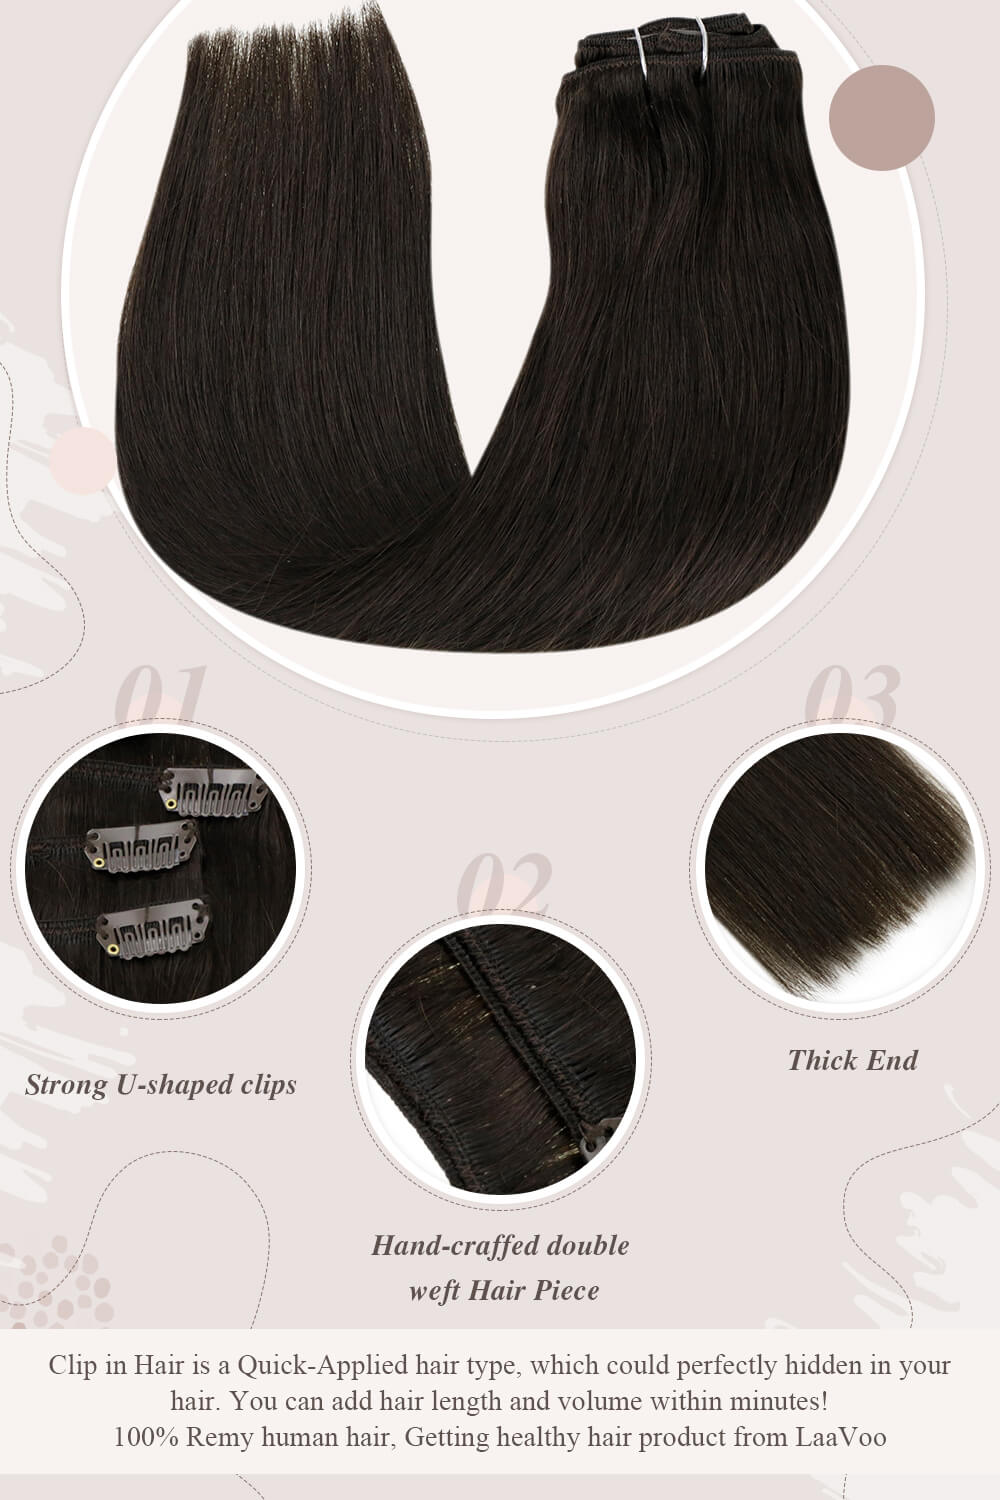 darkest brownstrong U shaped clips hand craffed double weft hair piece thick end clip in hair perfectly hidden in your hair you can add hair length and volume within minutes Remy human hair getting healthy hair product